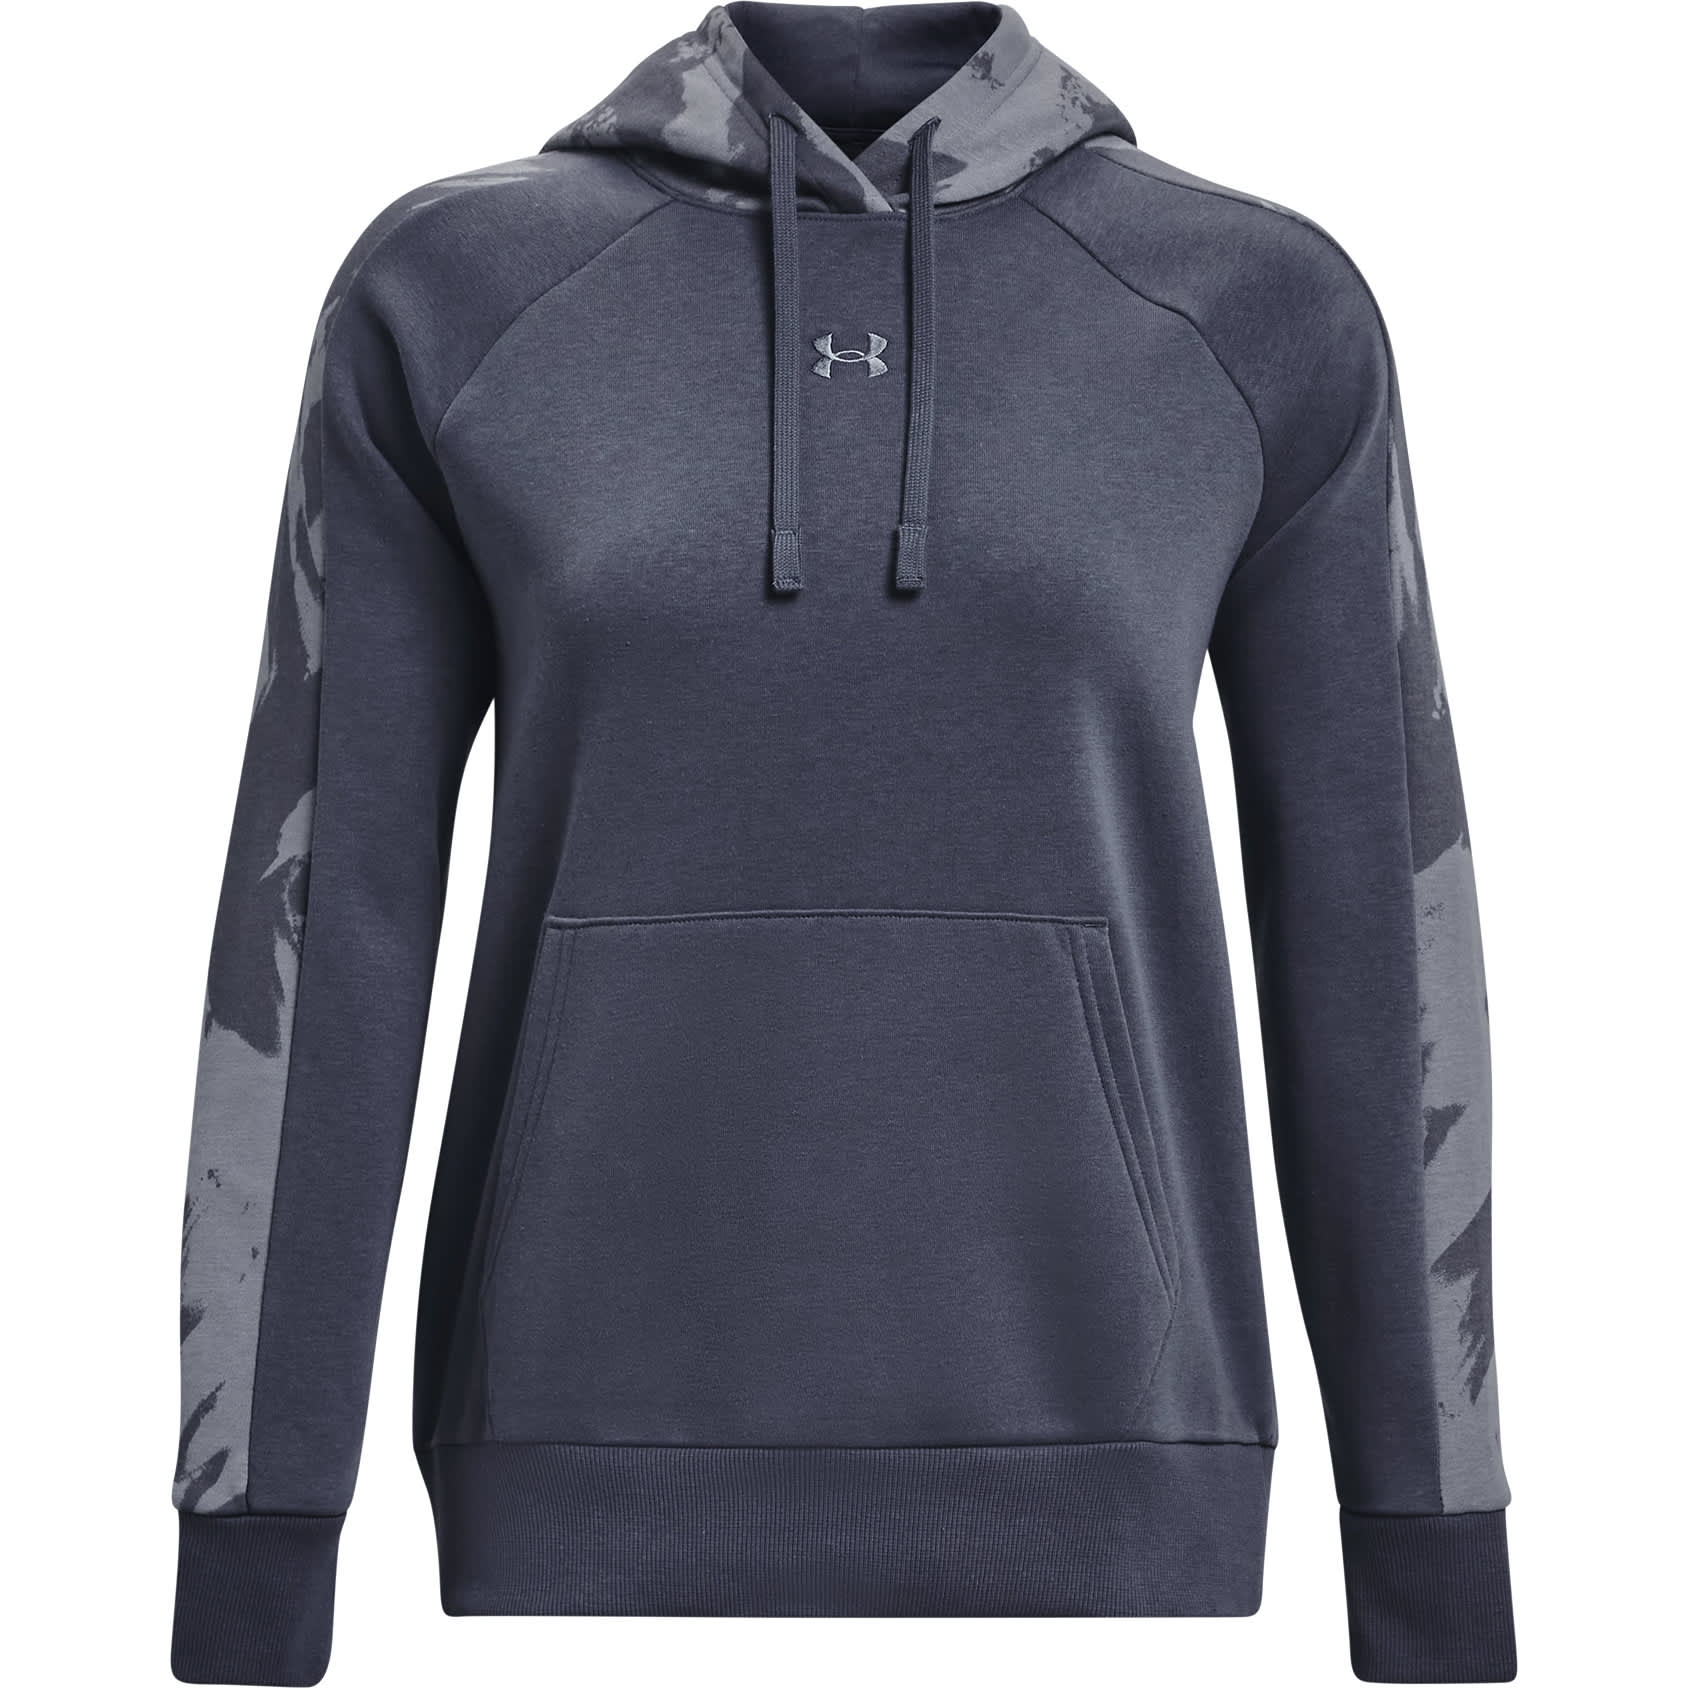 Under Armour® Women's Rival Long-Sleeve Hoodie